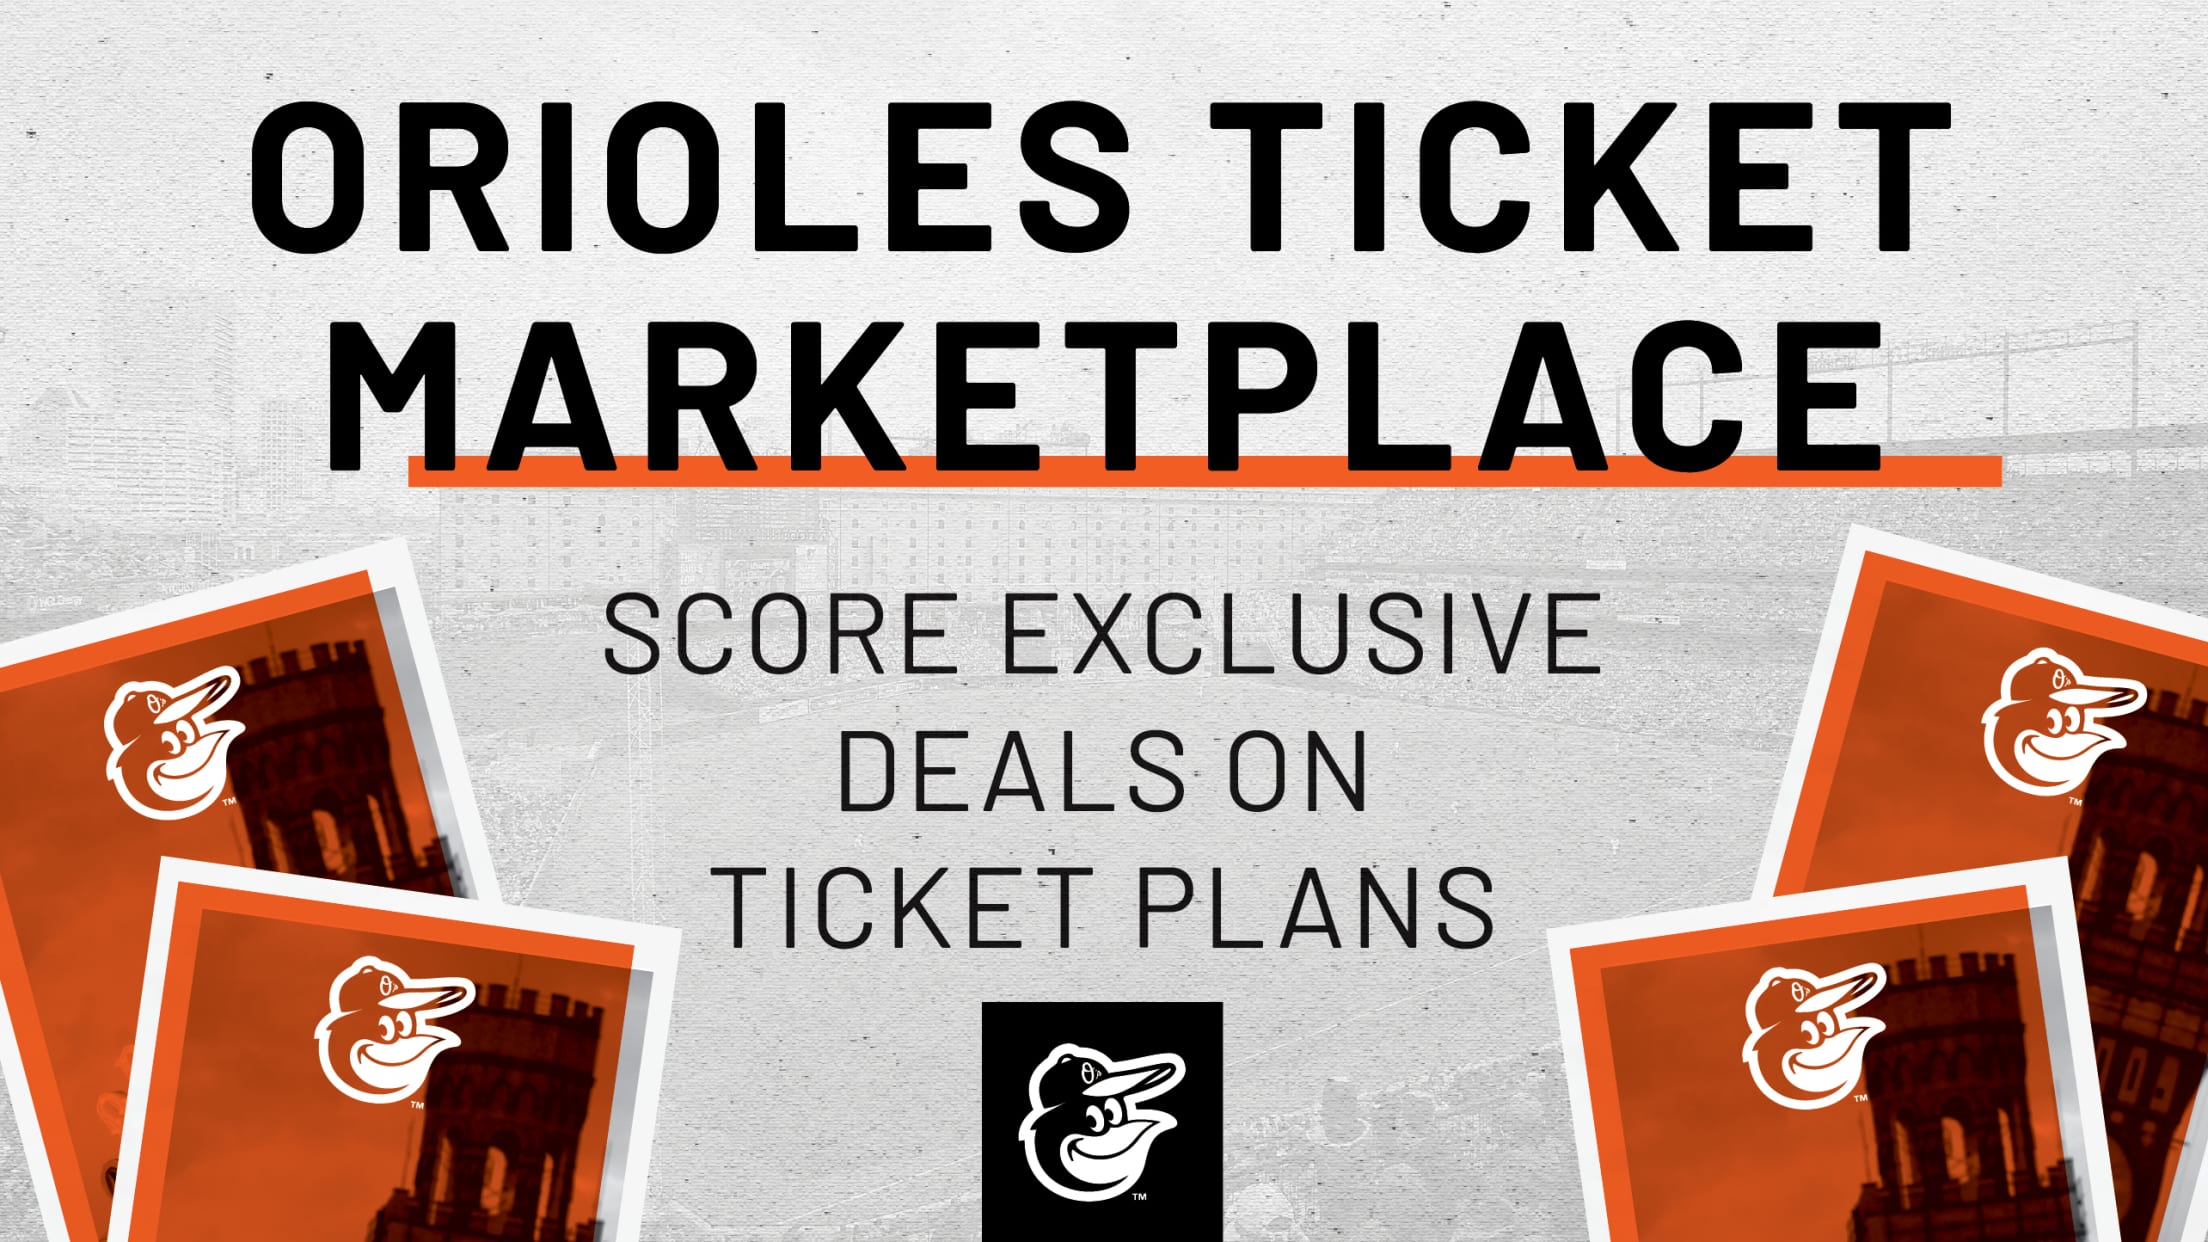 Oriole Park Guide – Where to Park, Eat, and Get Cheap Tickets